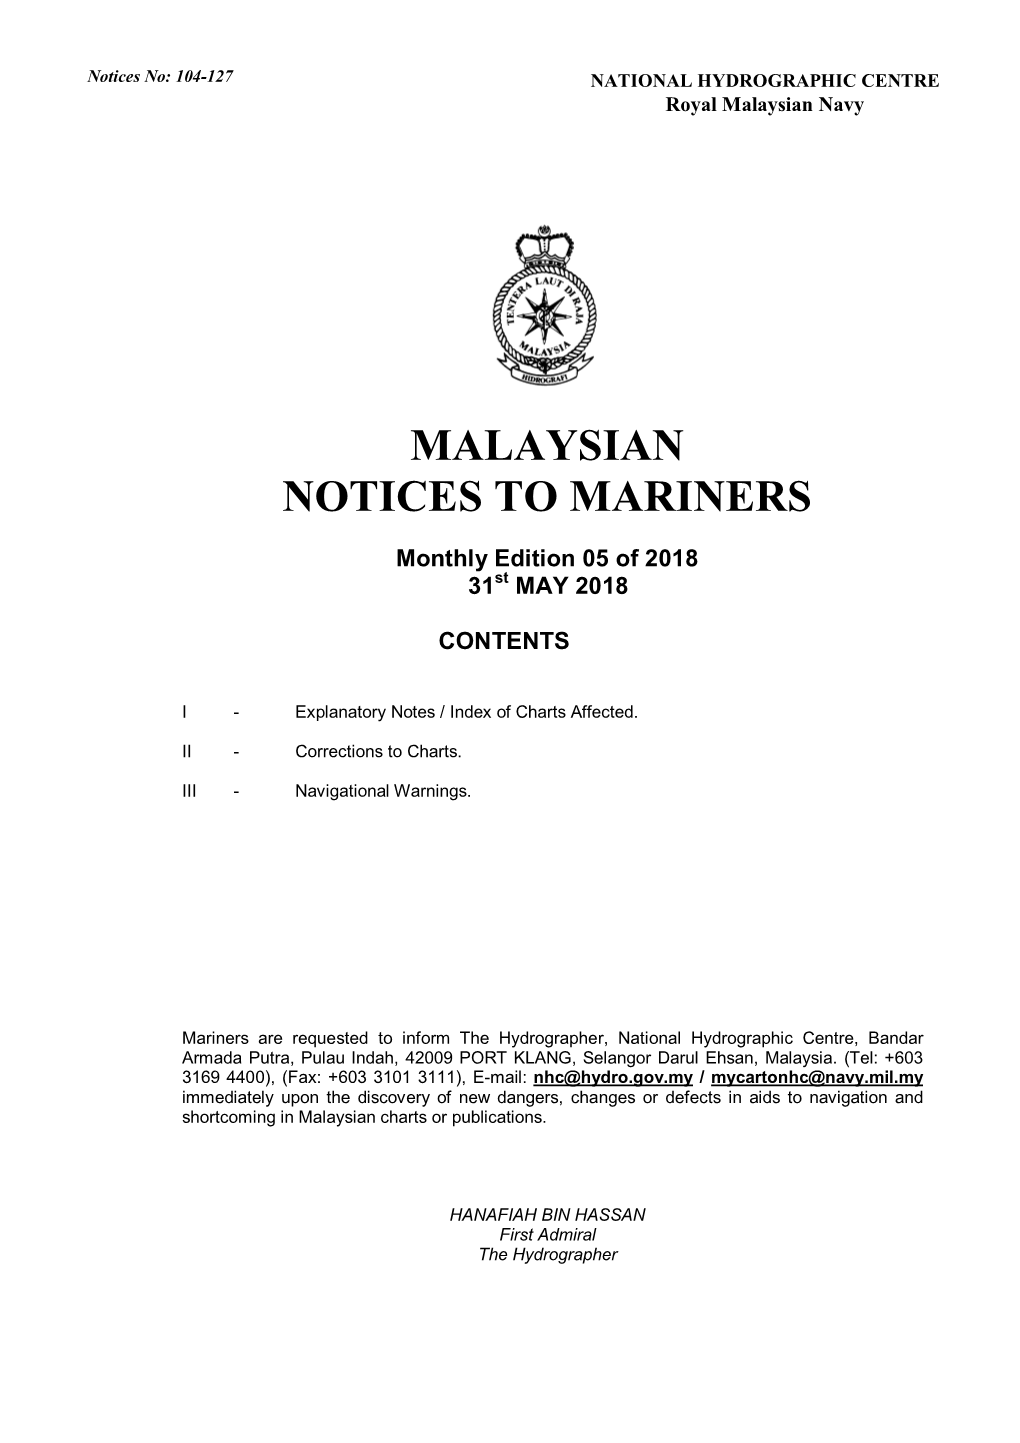 Malaysian Notices to Mariners